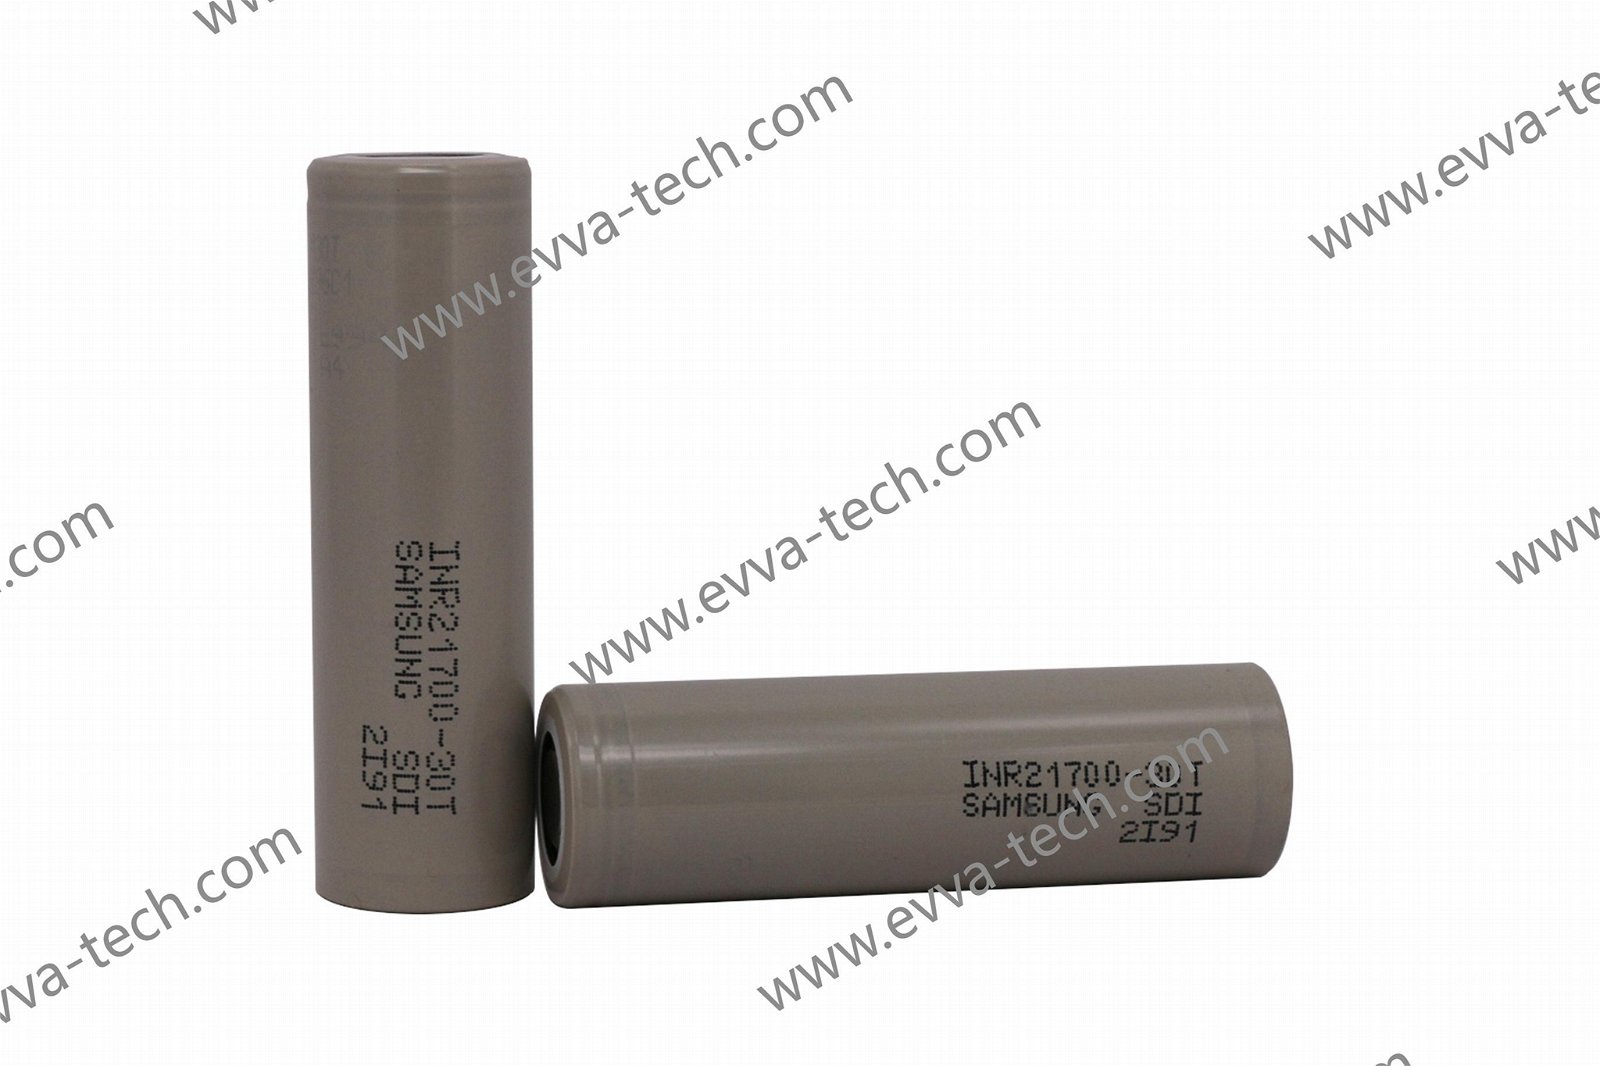 Samsung INR21700-30T for battery pack